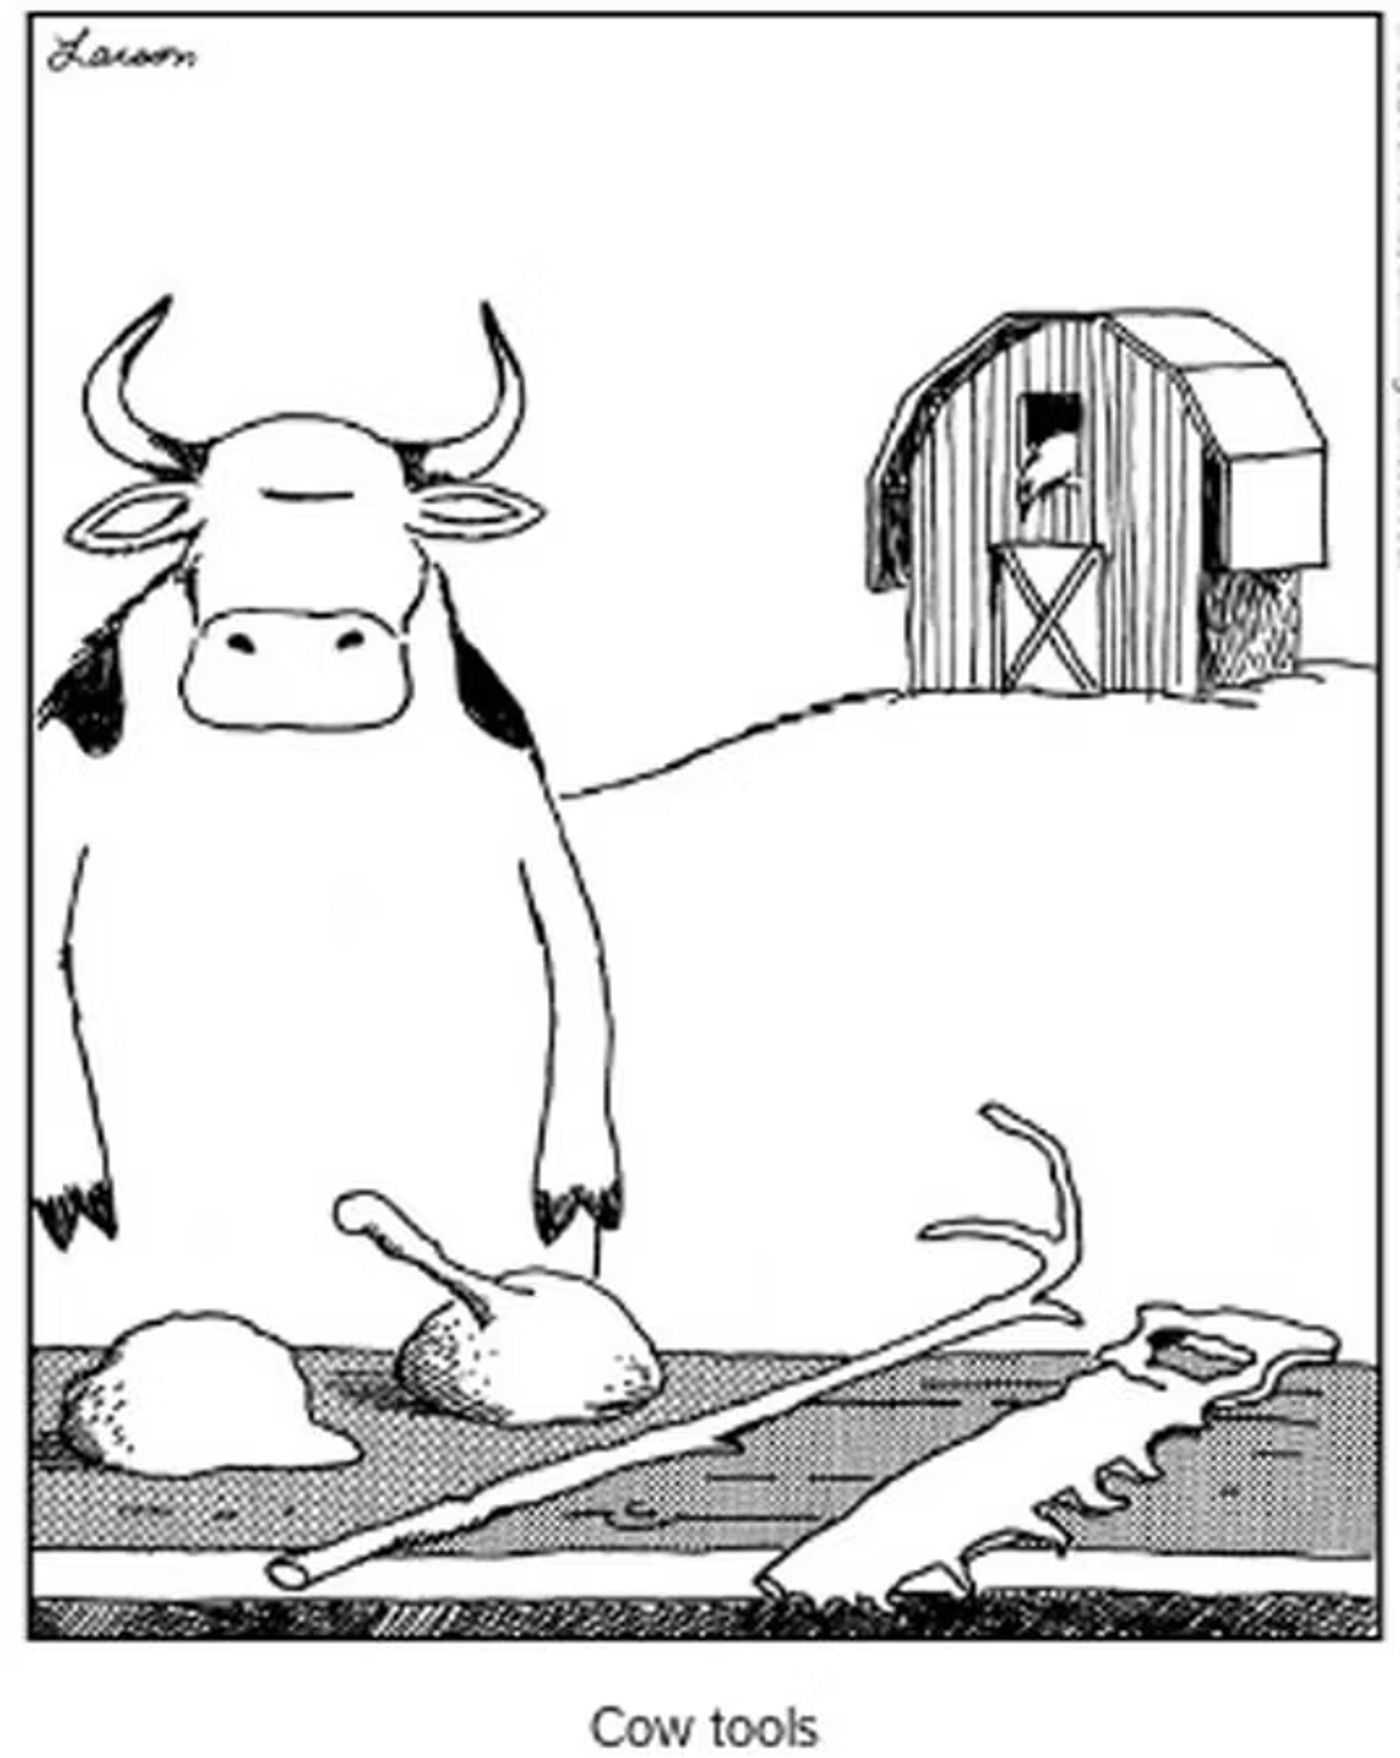 Cow tools